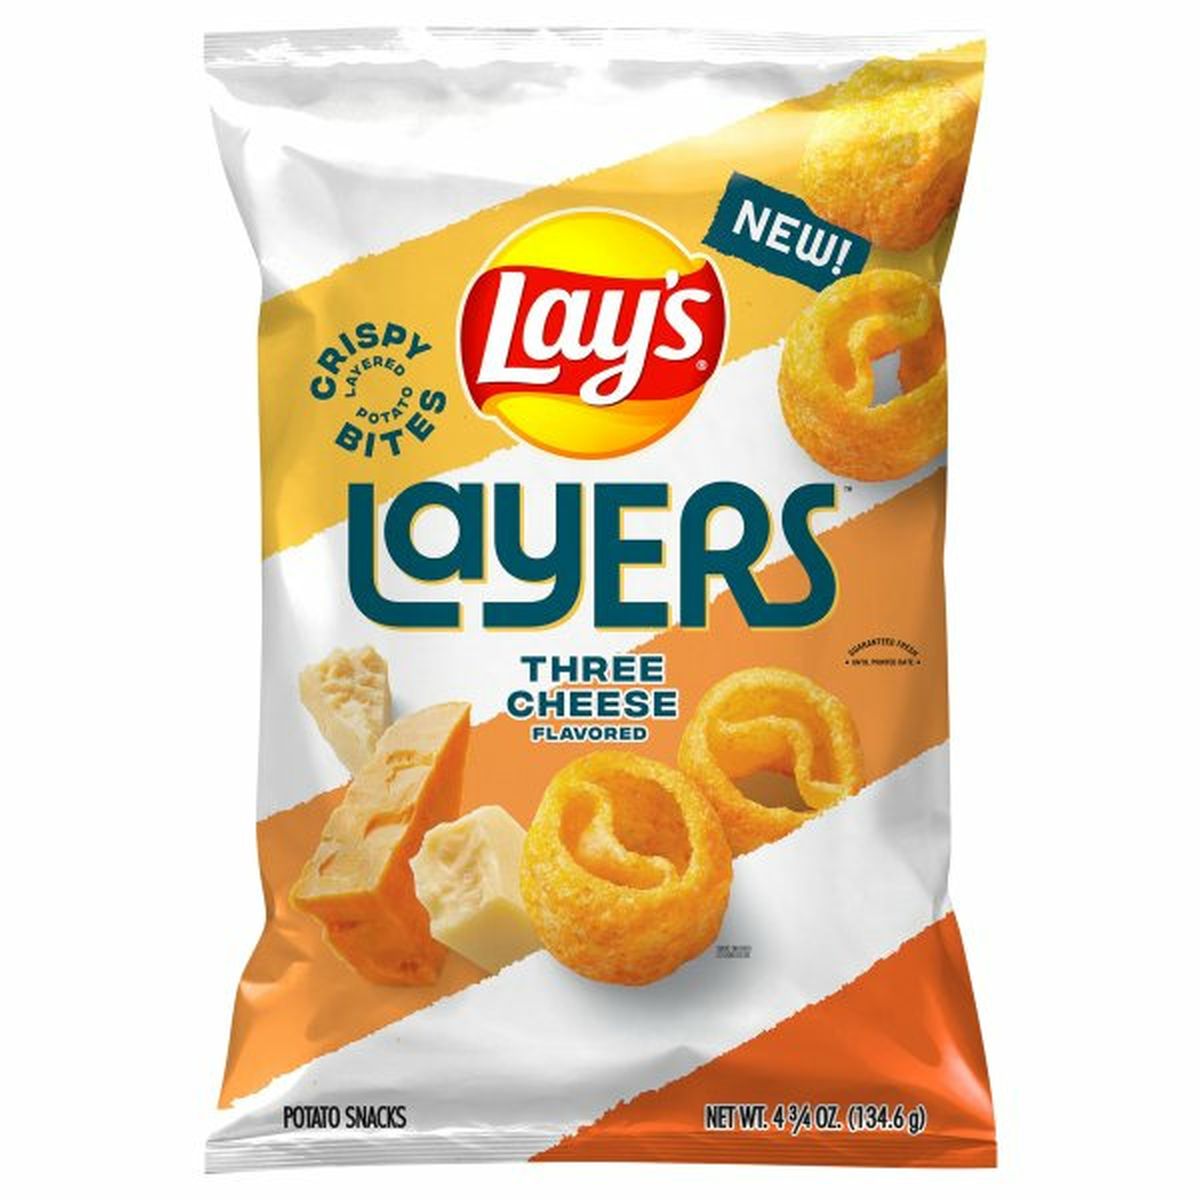 Calories in Lay's Layers Potato Snacks, Three Cheese Flavored